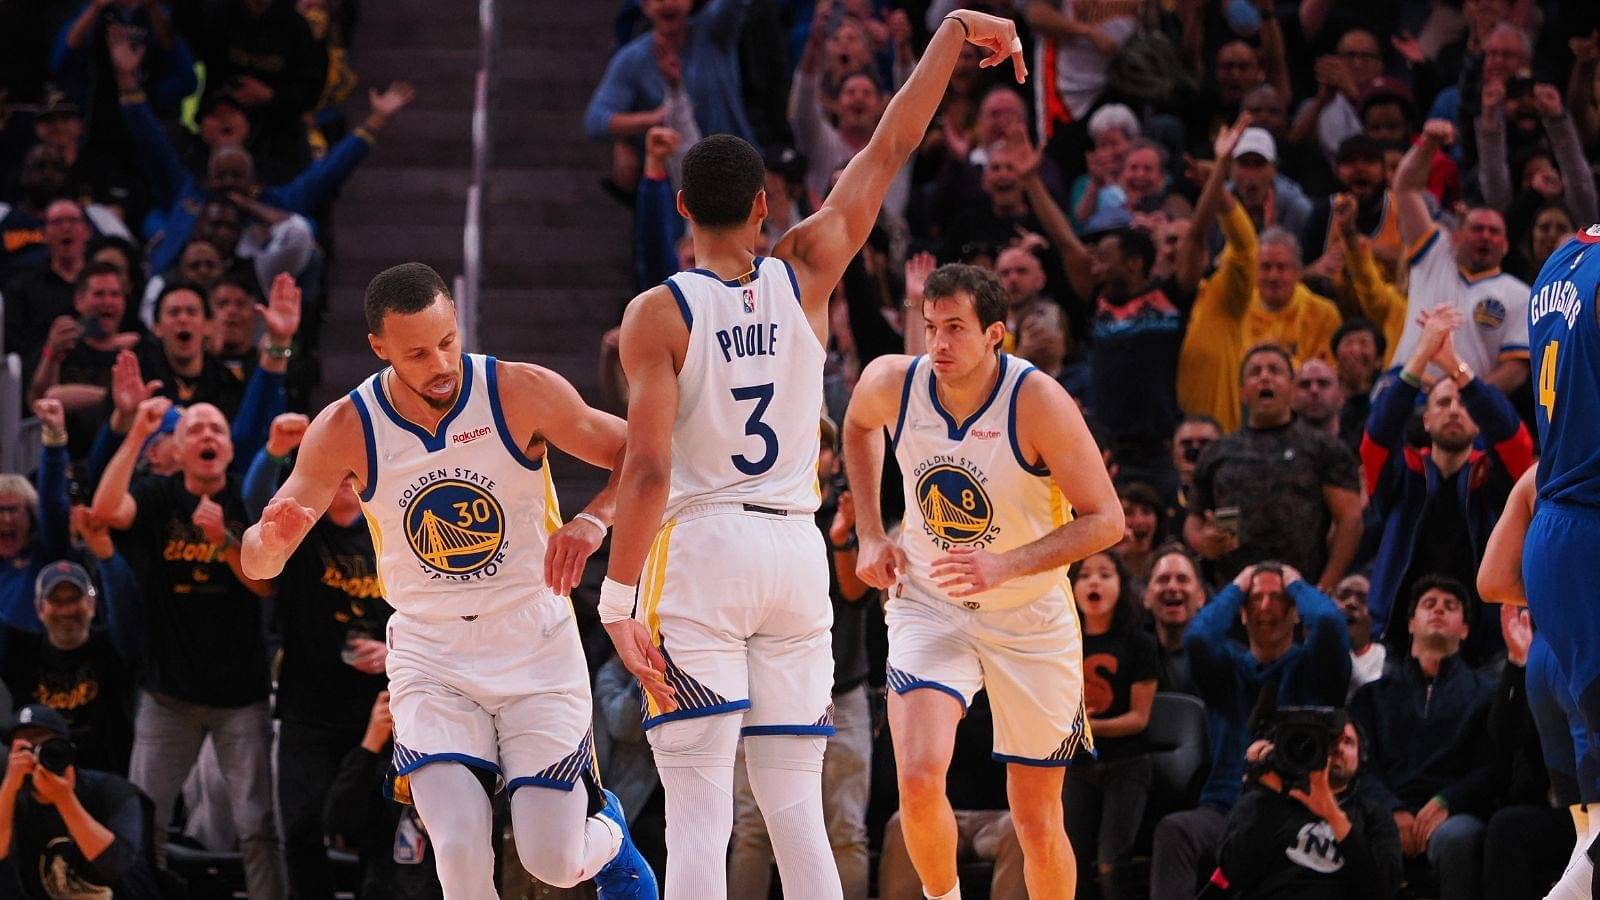 "Who better to pair with Splash Brothers than a player who has 'Pool' in his name?": Jordan Poole gets ultimate praise from Dub Nation after torching Nuggets in two straight games